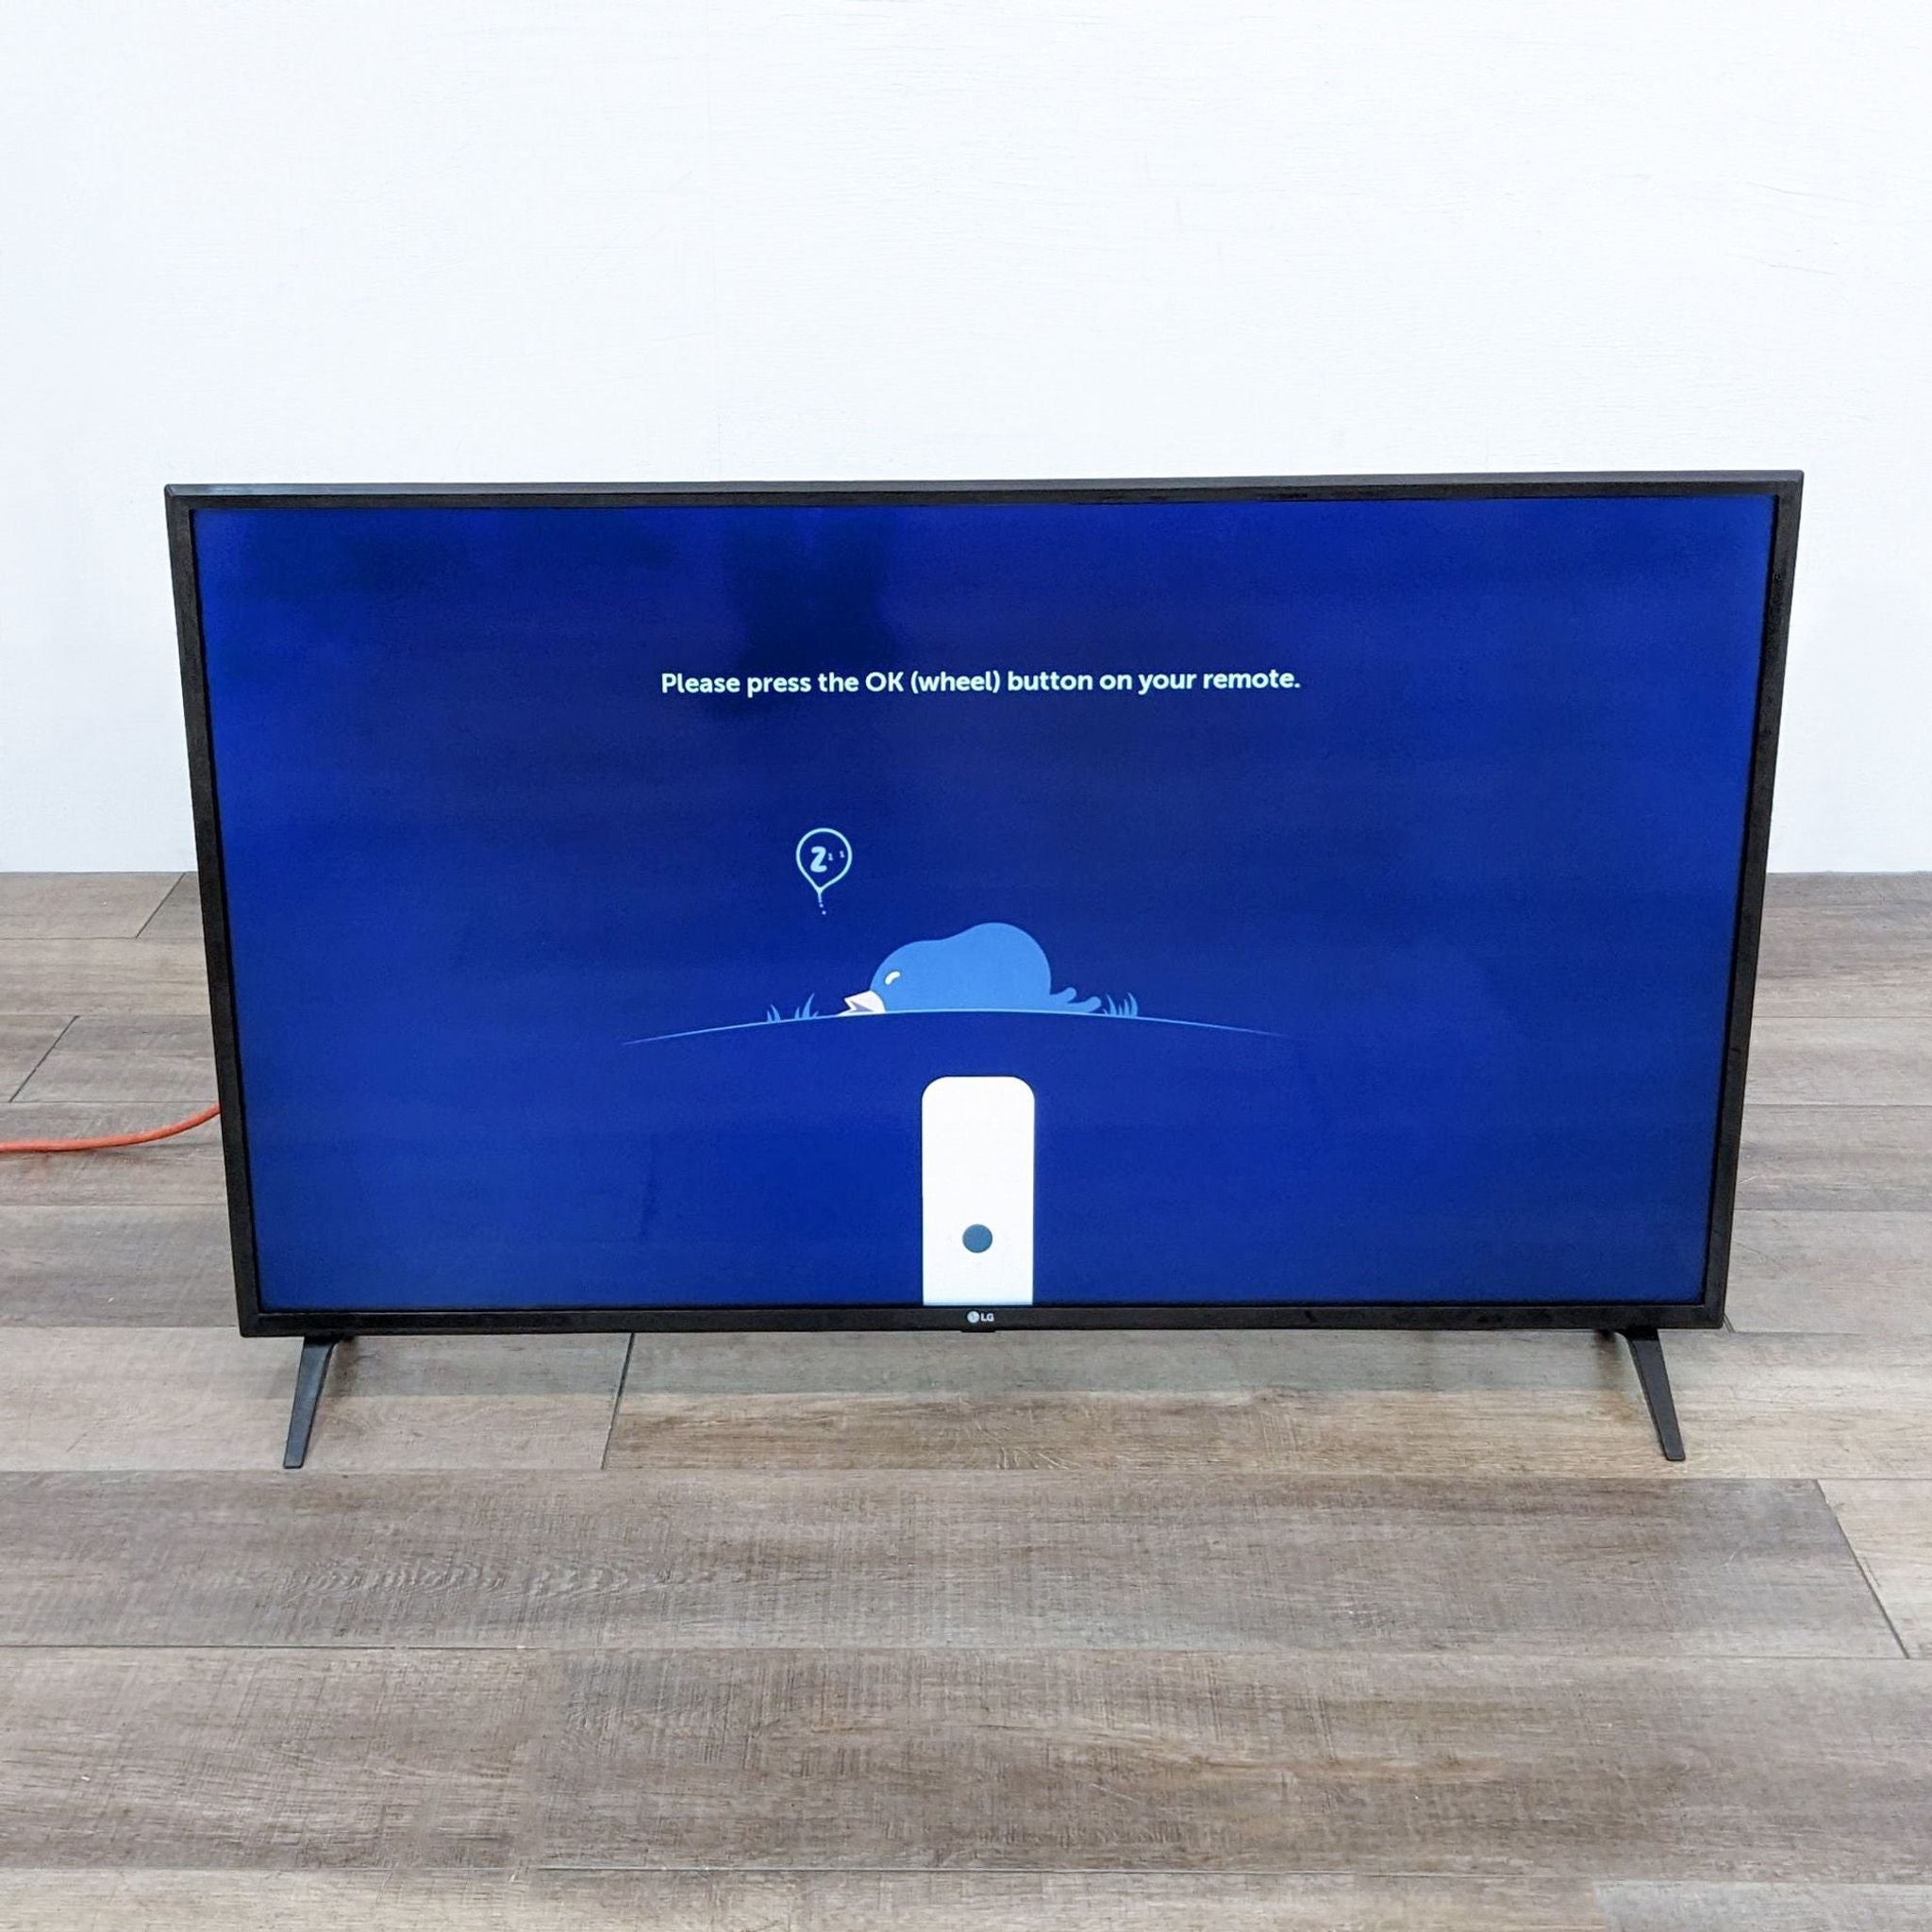 LG television on wooden floor displaying setup screen with a remote control prompt.